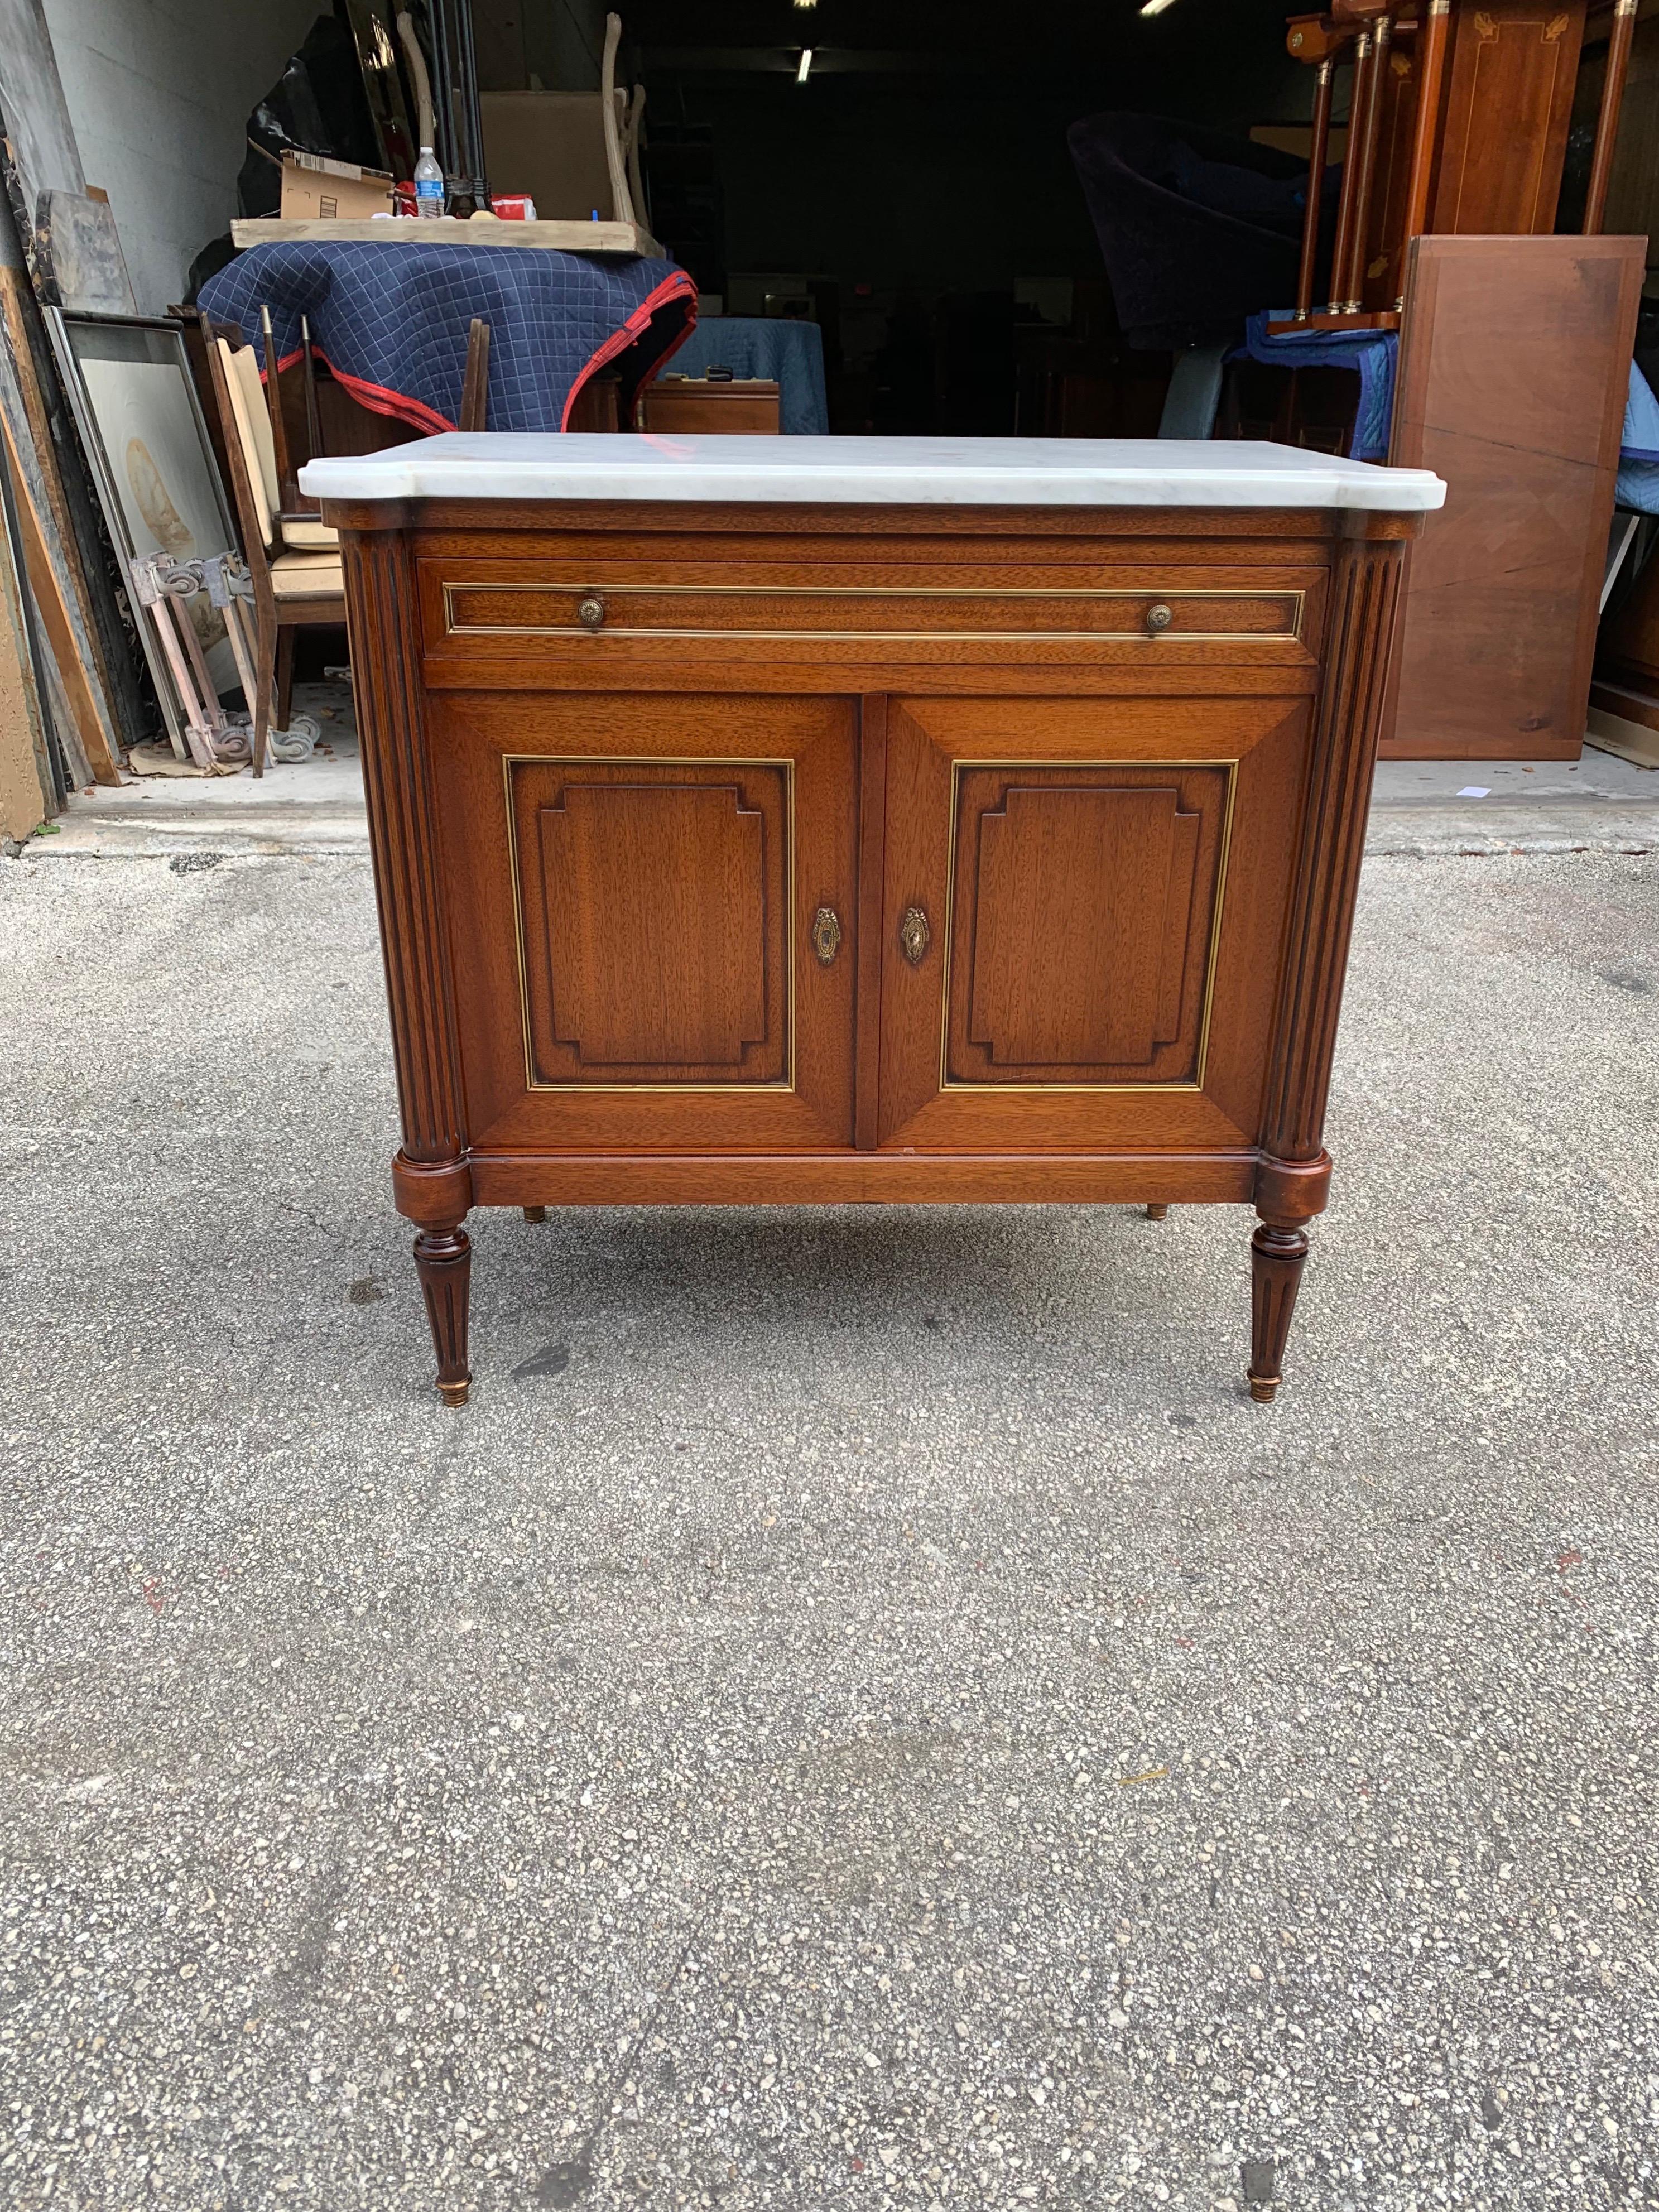 Fine French antique Louis XVI style sideboard or credenza made of mahogany with a beautiful Carrara marble top, the mahogany wood has been finished with a French polished high luster inside and outside. The credenza has 2 doors and 1 drawers, with